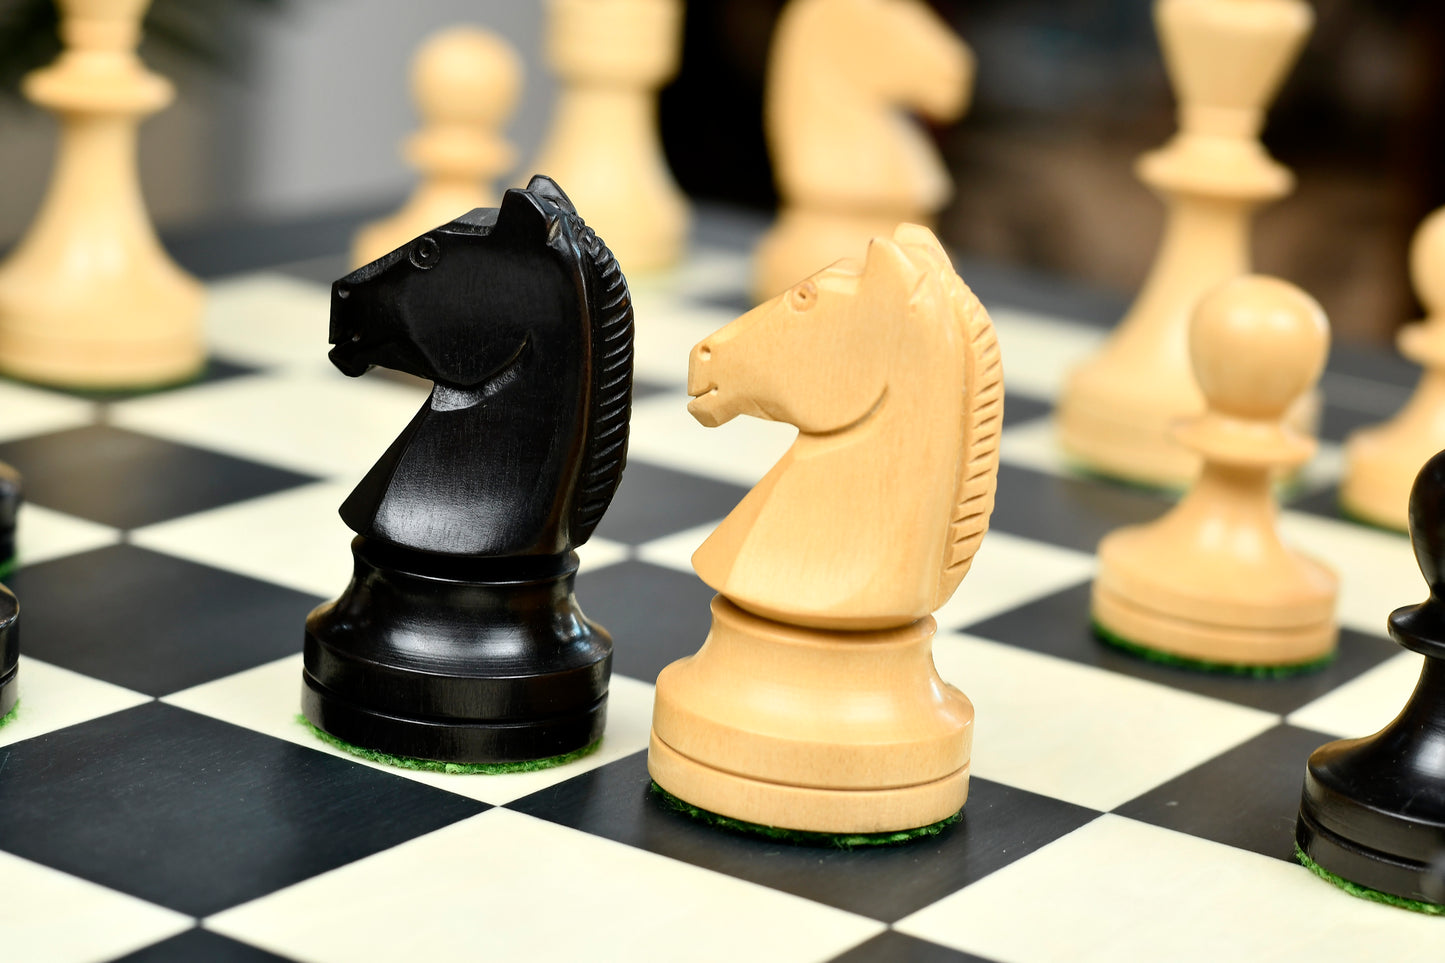 Reproduced Russian (Soviet Era) Series Chess Pieces in Ebonized Boxwood & Natural Boxwood - 3.75" King